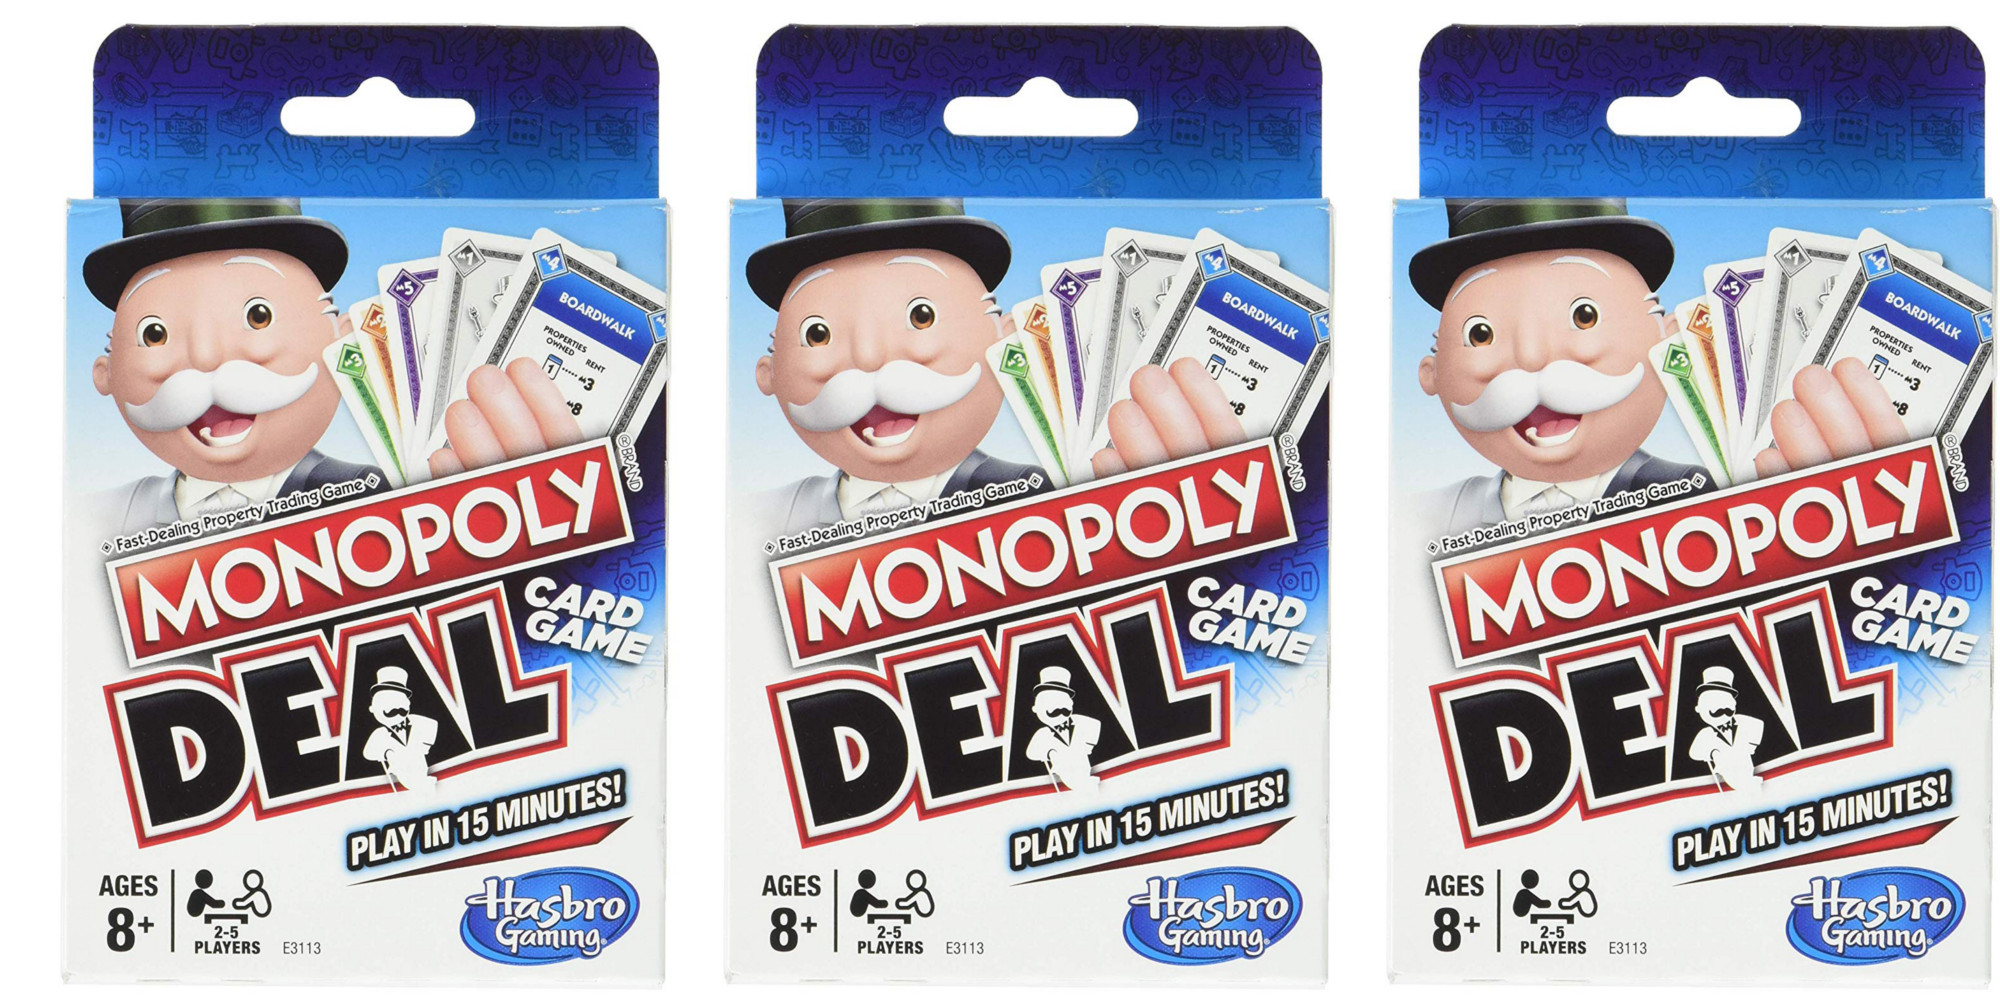 Play some quick games of Monopoly with the Deal card version for $4 (Reg.  $7)